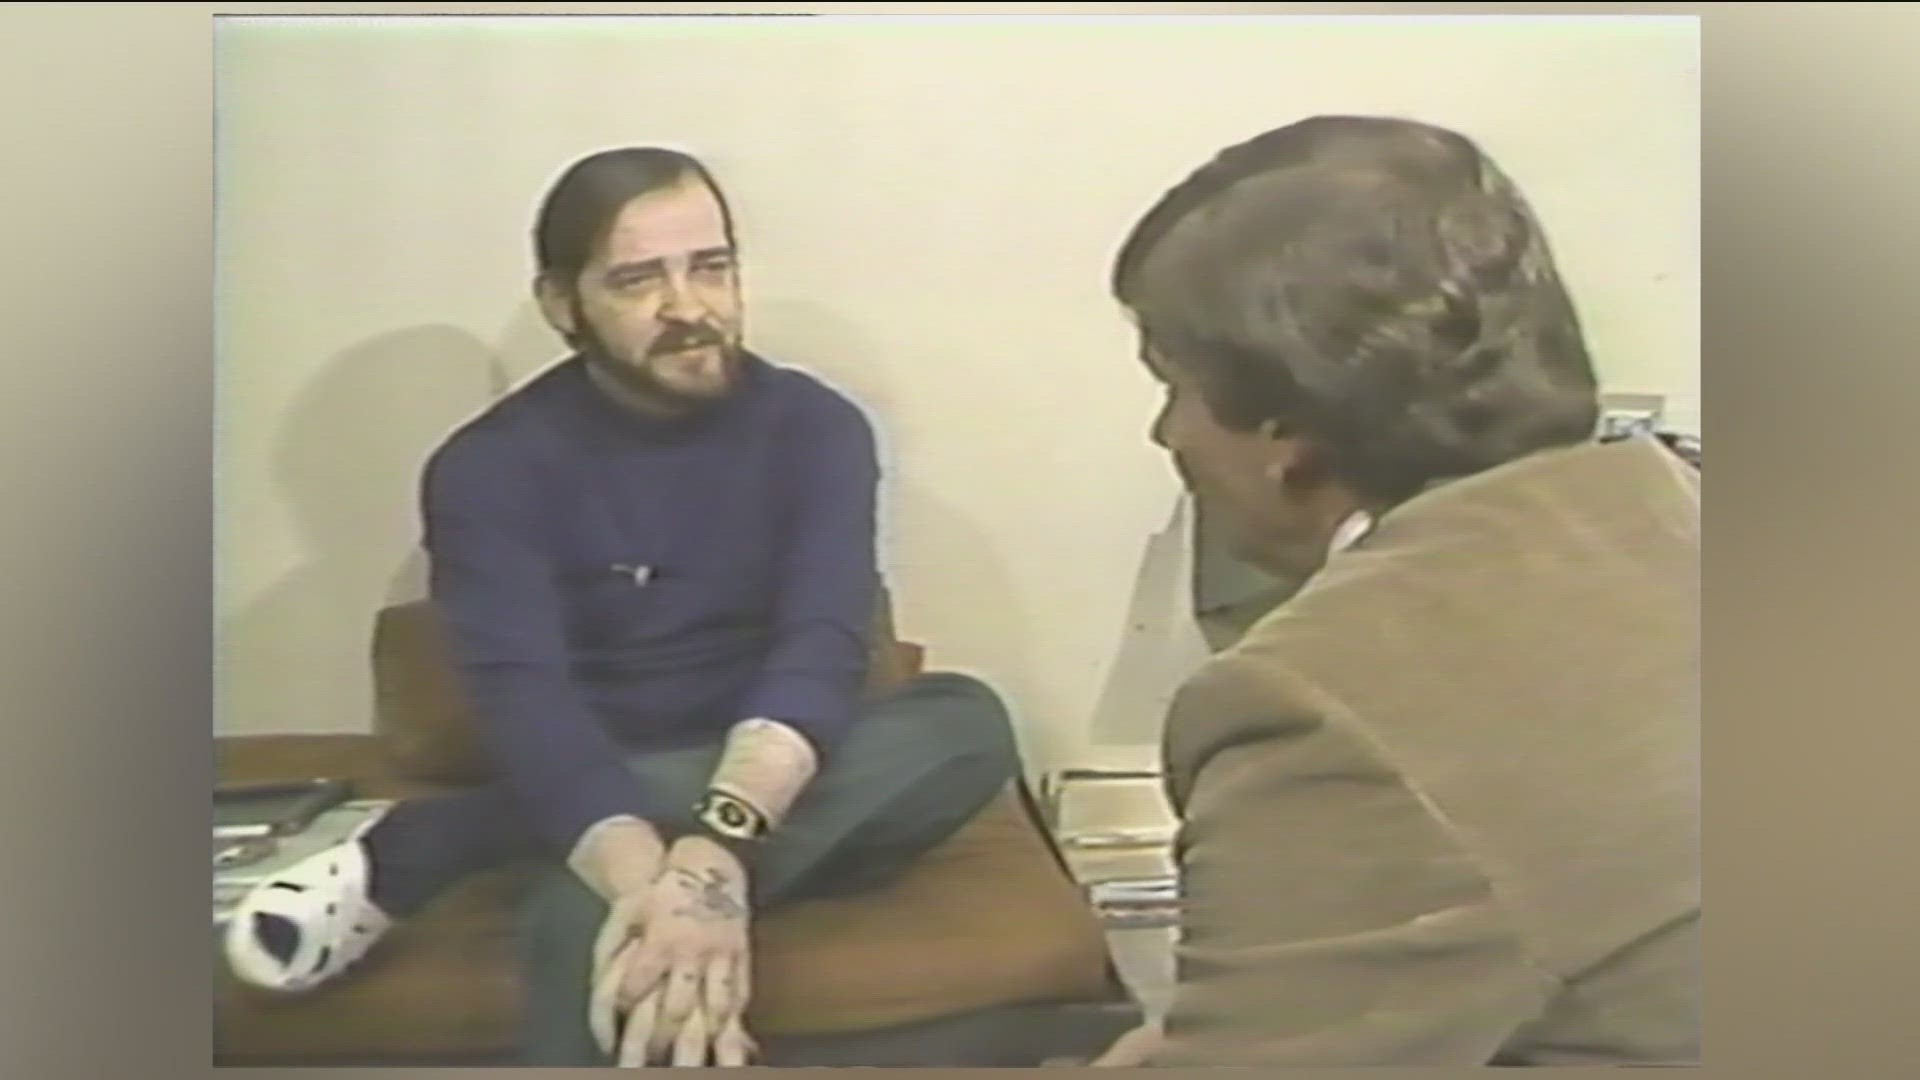 Back in 1981, Crime Reporter Roger Simmons spoke directly to Creech while on death row. KTVB spoke with Simmons who shared that experience.